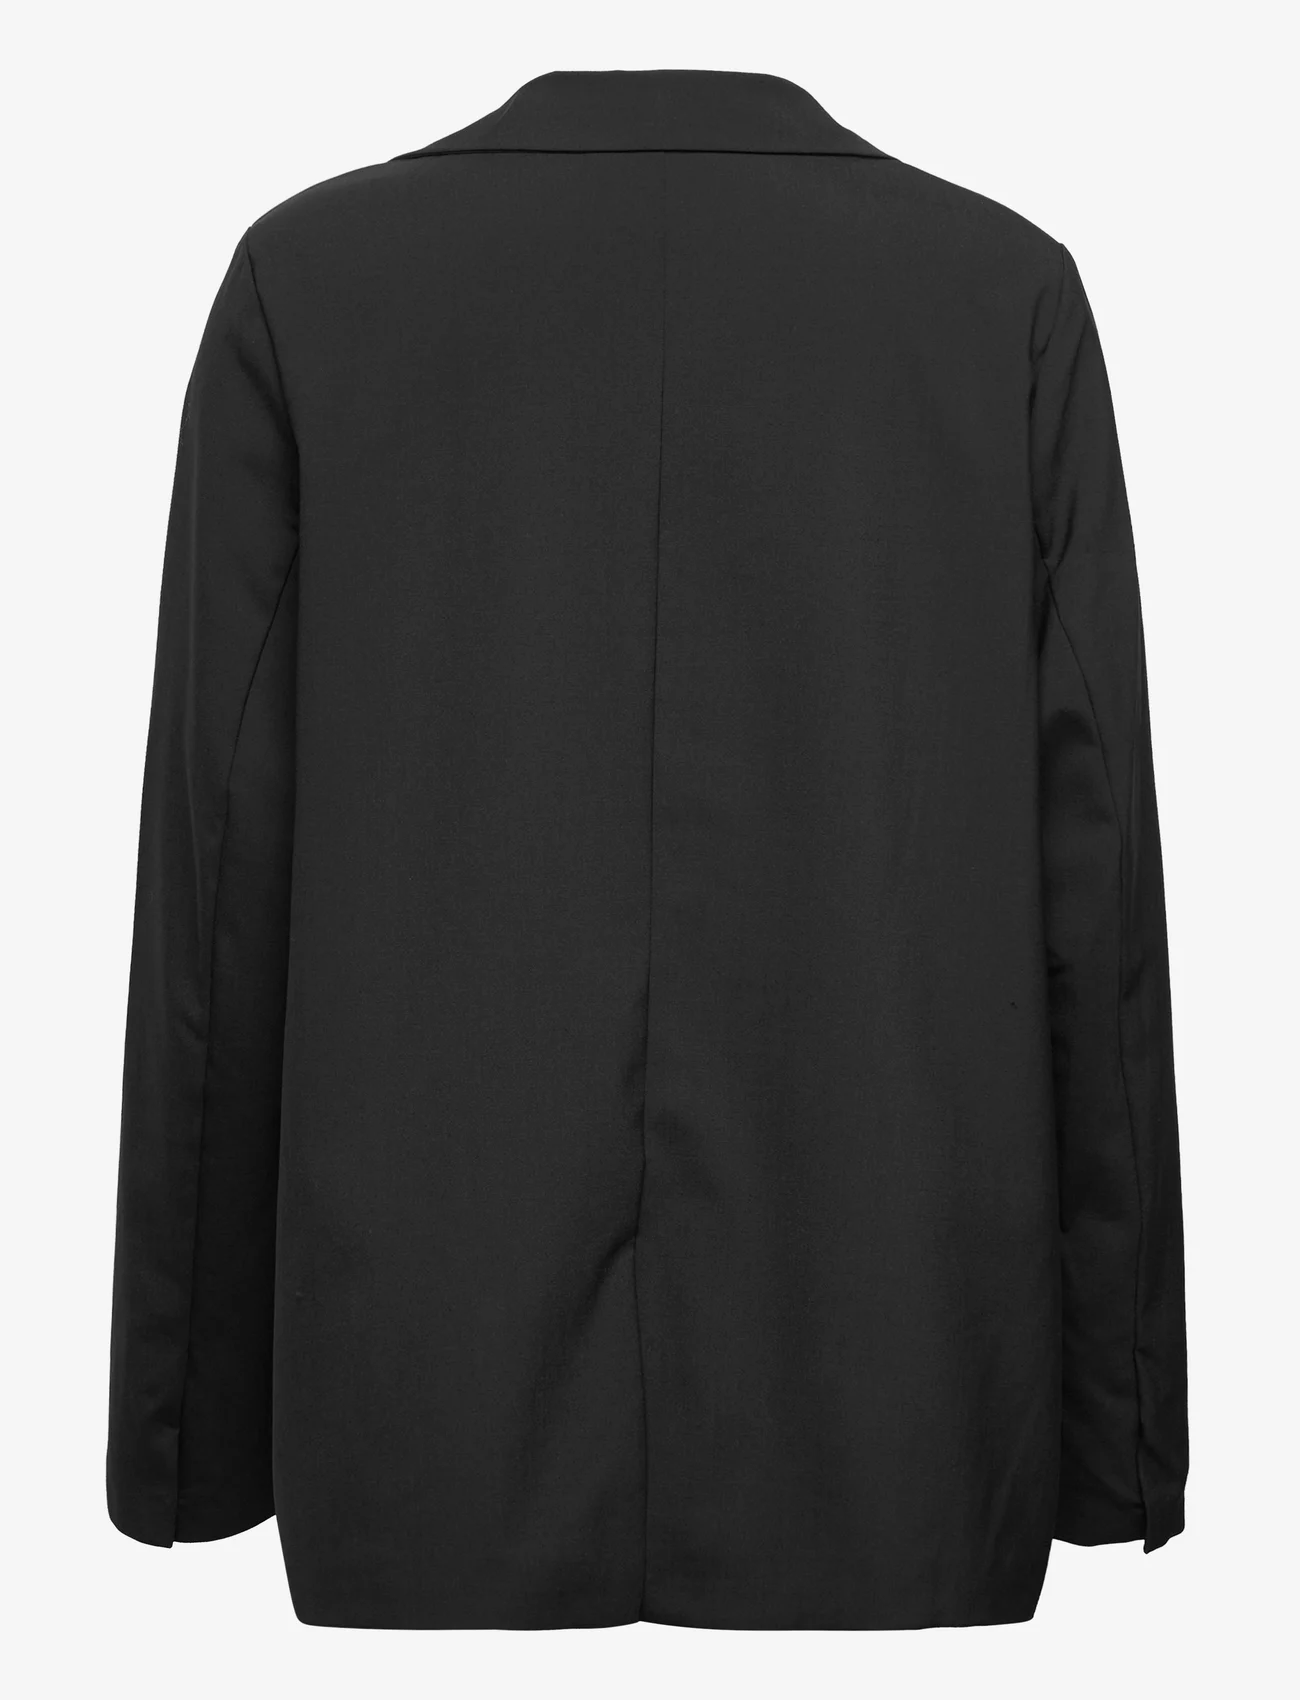 Ahlvar Gallery - Liv wool blazer - party wear at outlet prices - black - 1